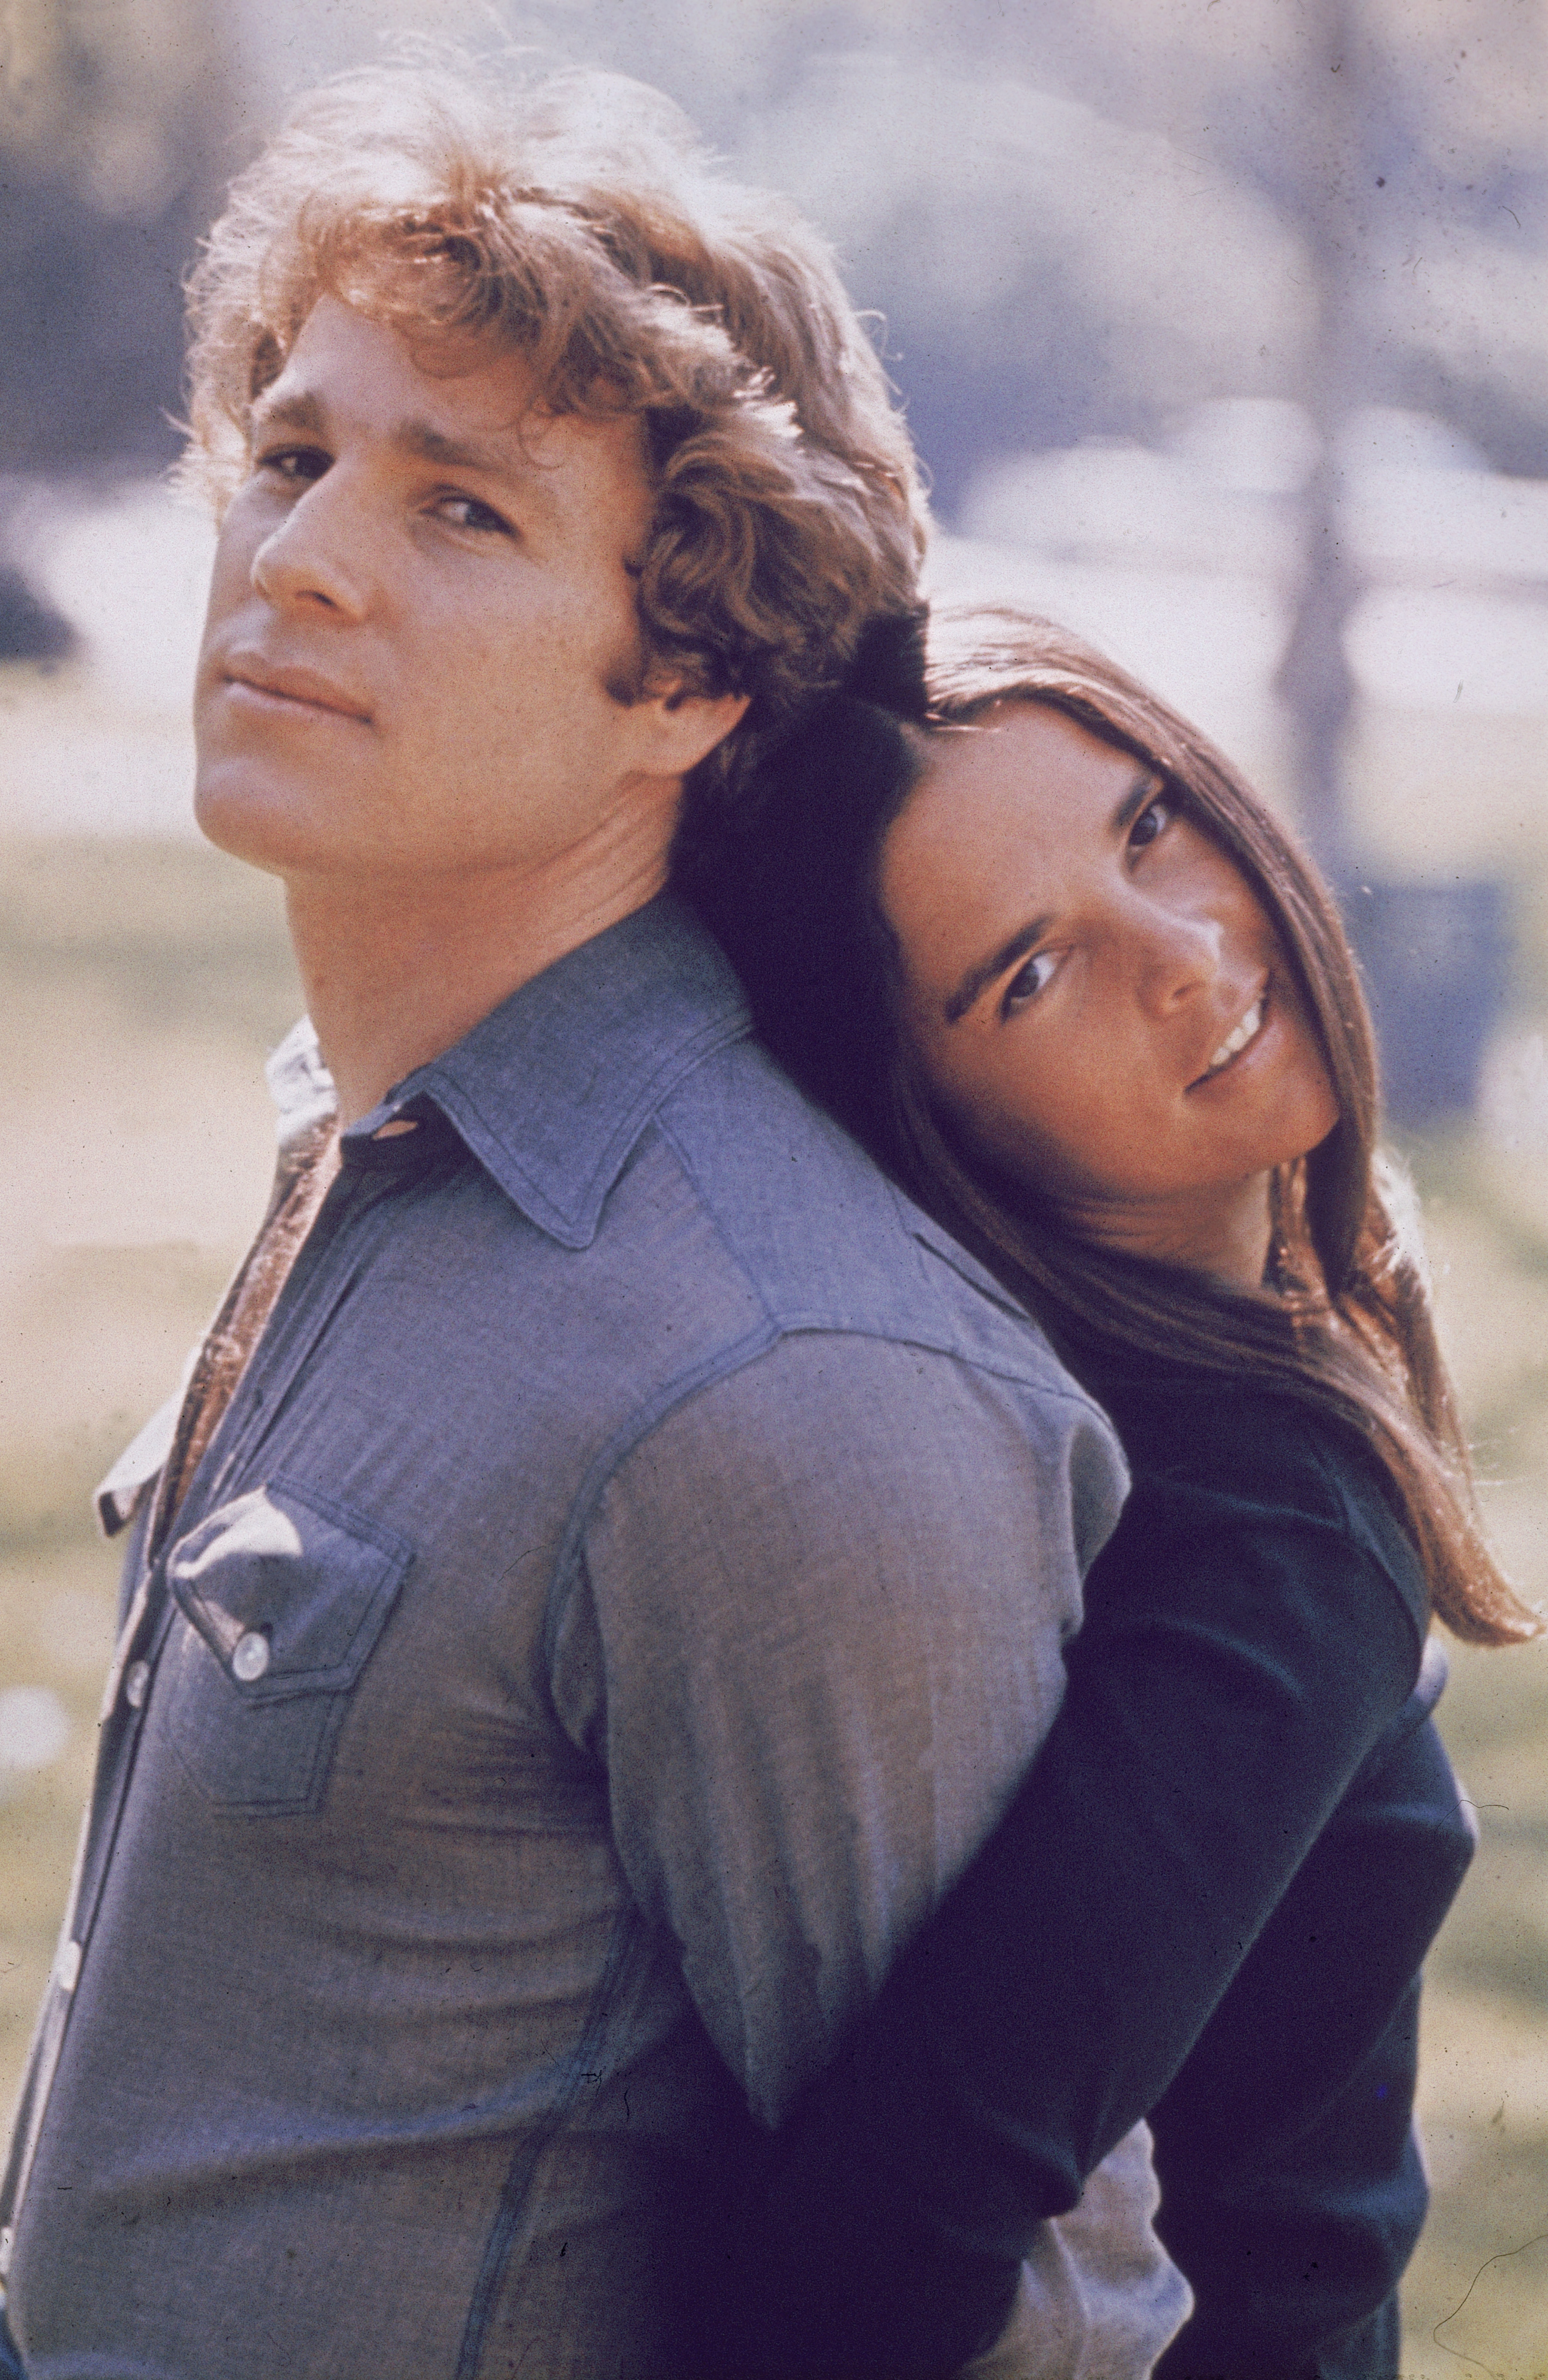 Ryan O'Neal and Ali MacGraw posing for their movie "Love Story" in 1970 | Source: Getty Images